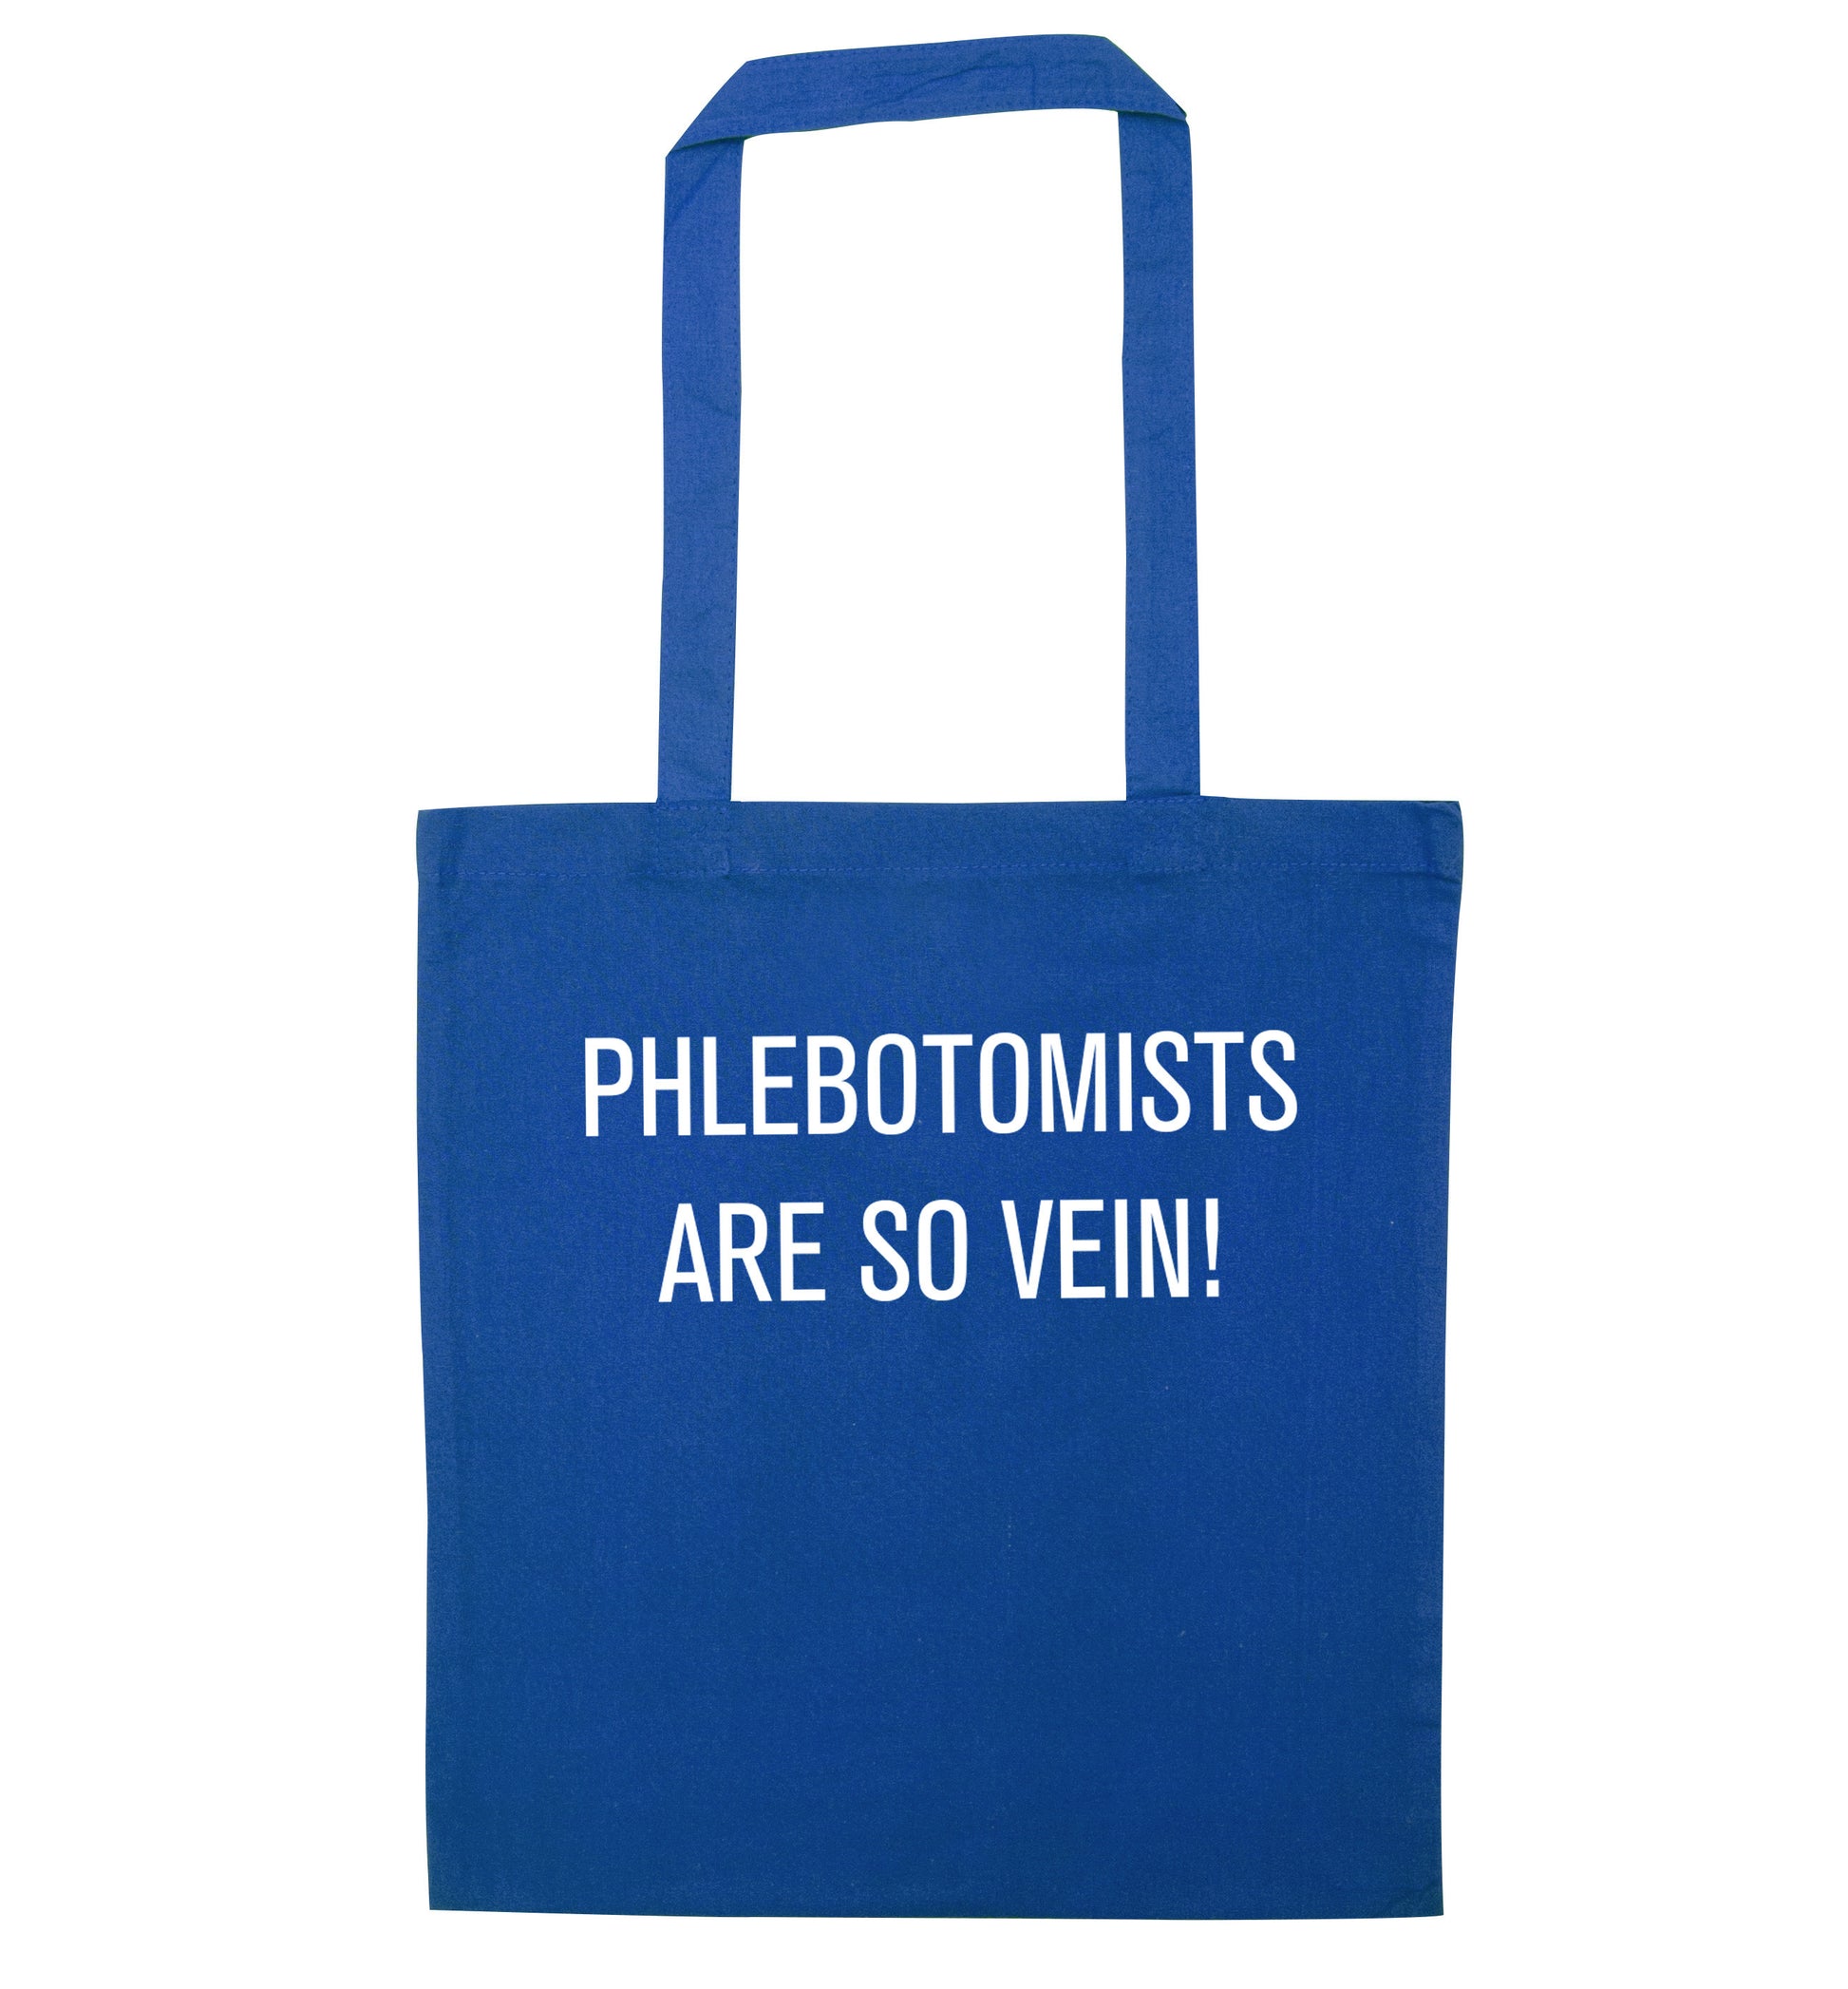 Phlebotomists are so vein! blue tote bag